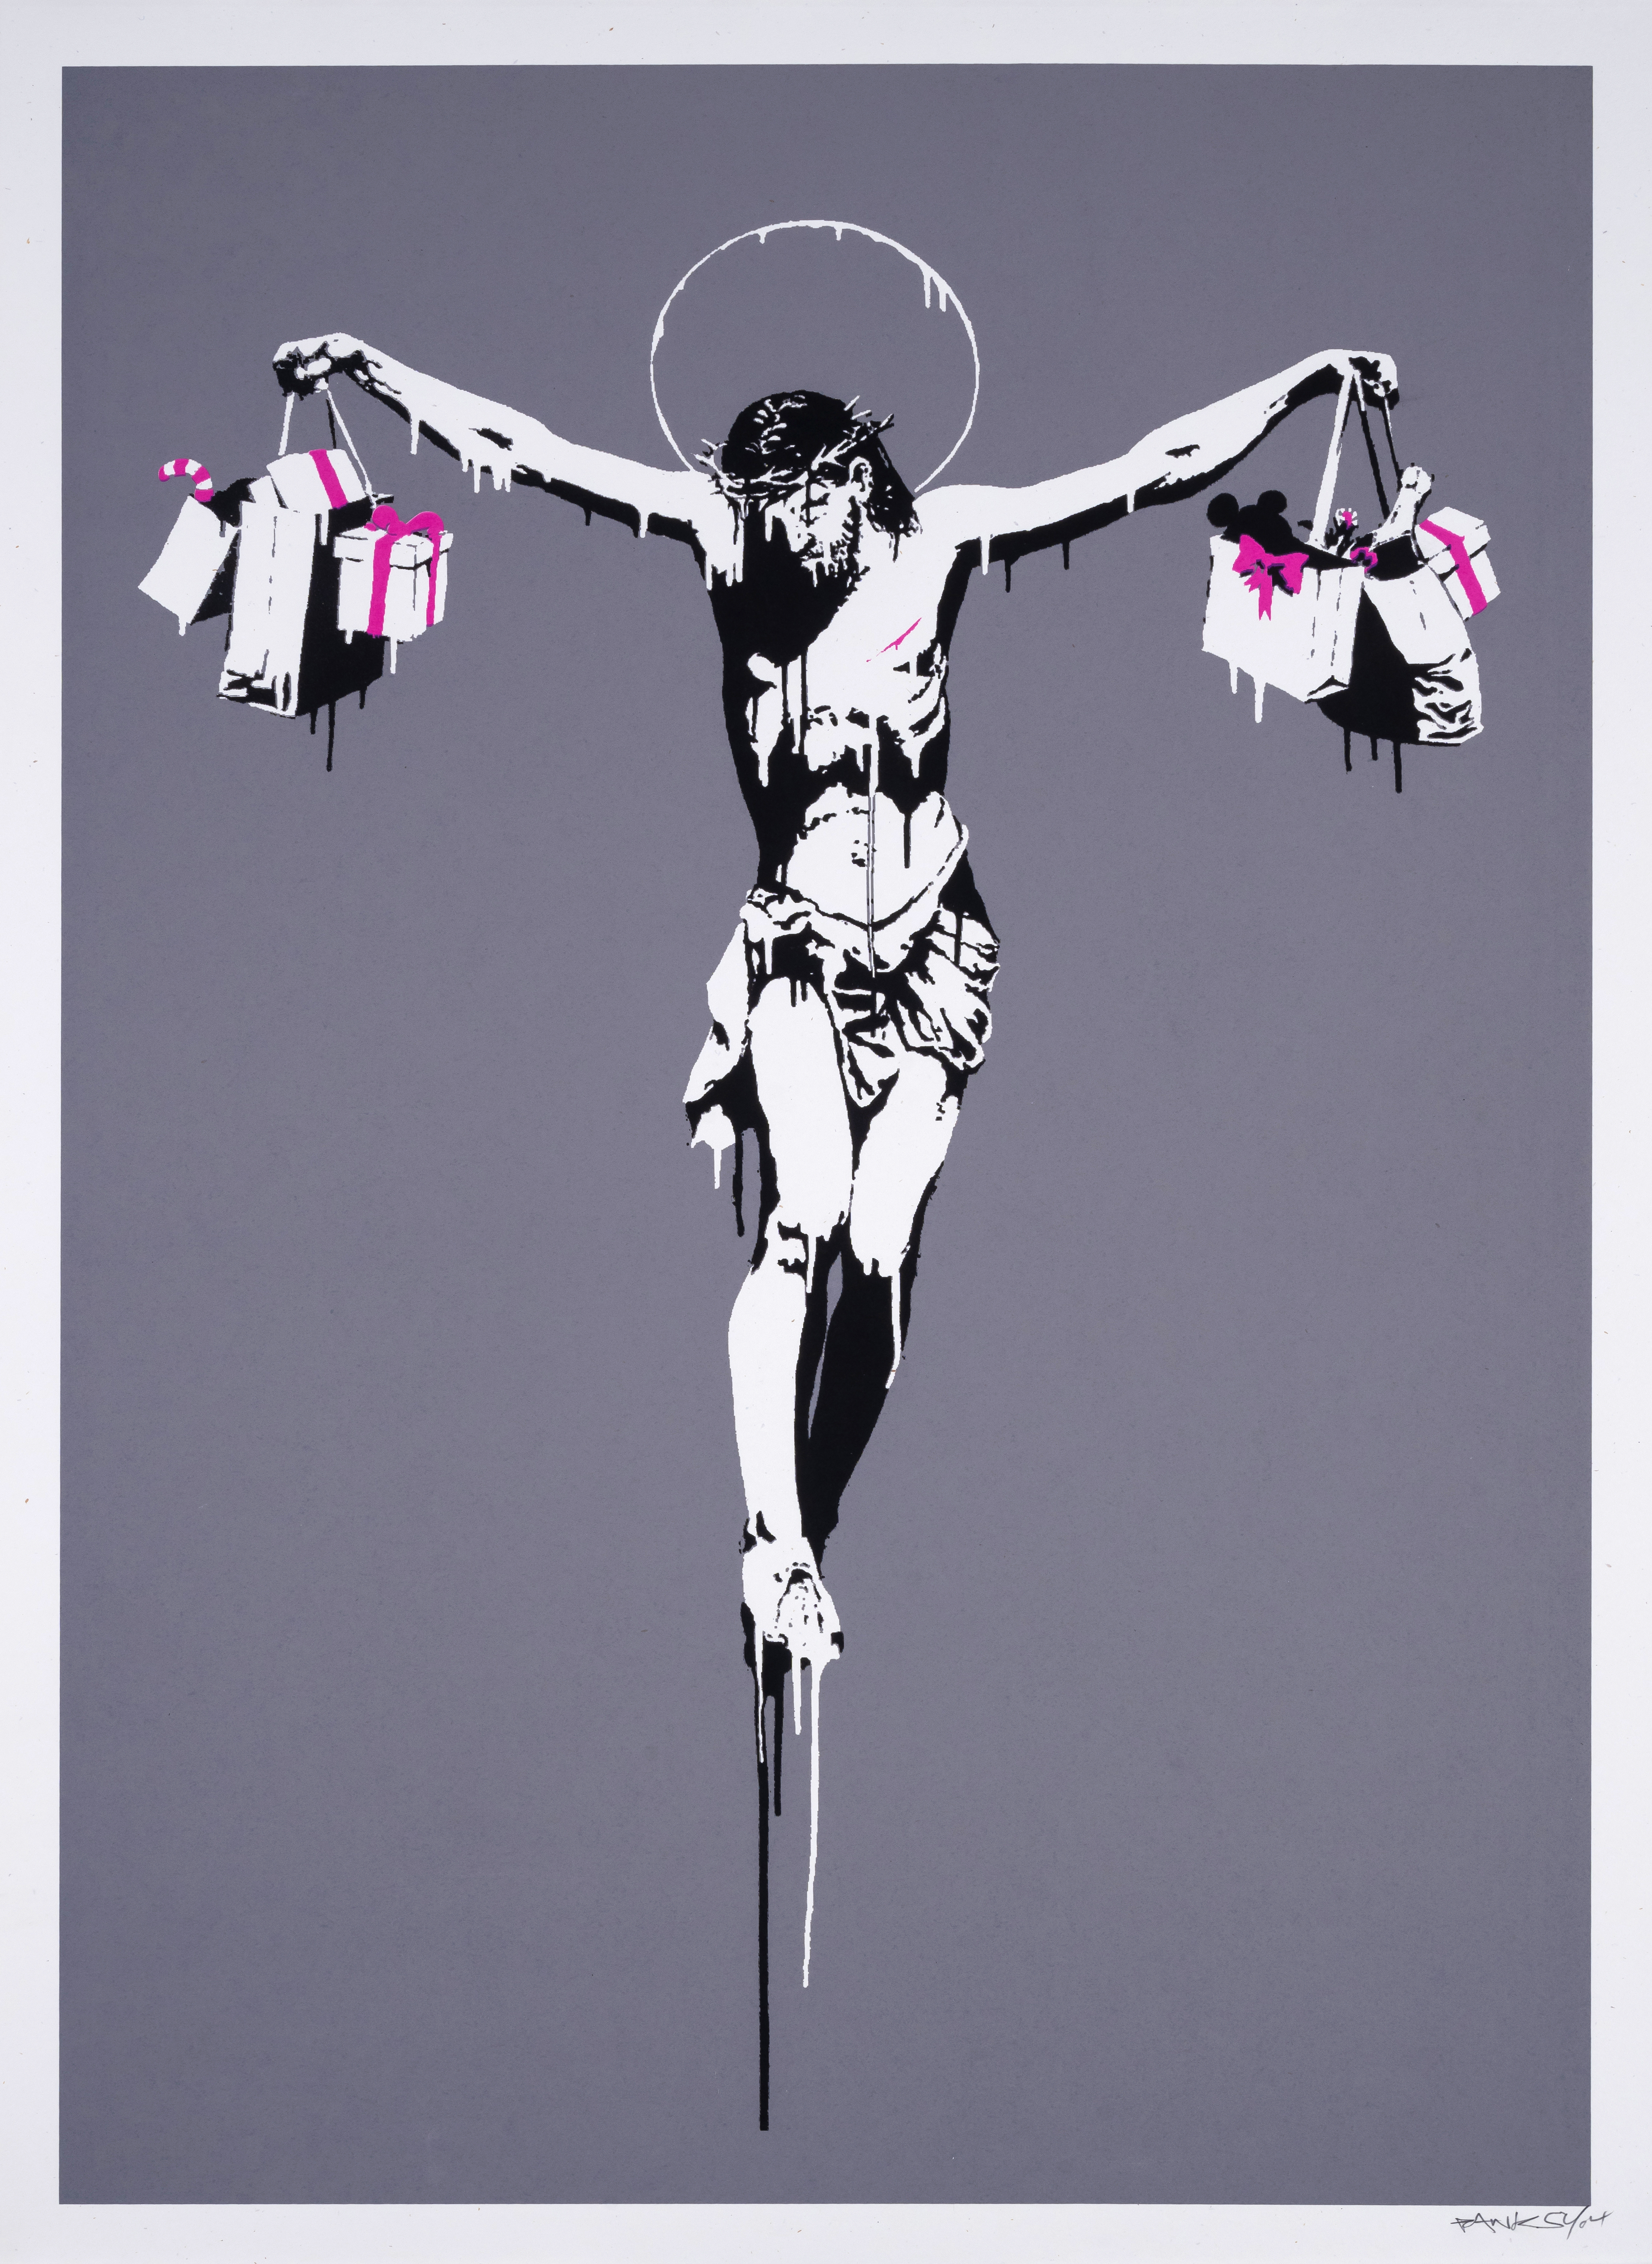 Banksy (b.1974) Christ with Shopping Bags (Signed)